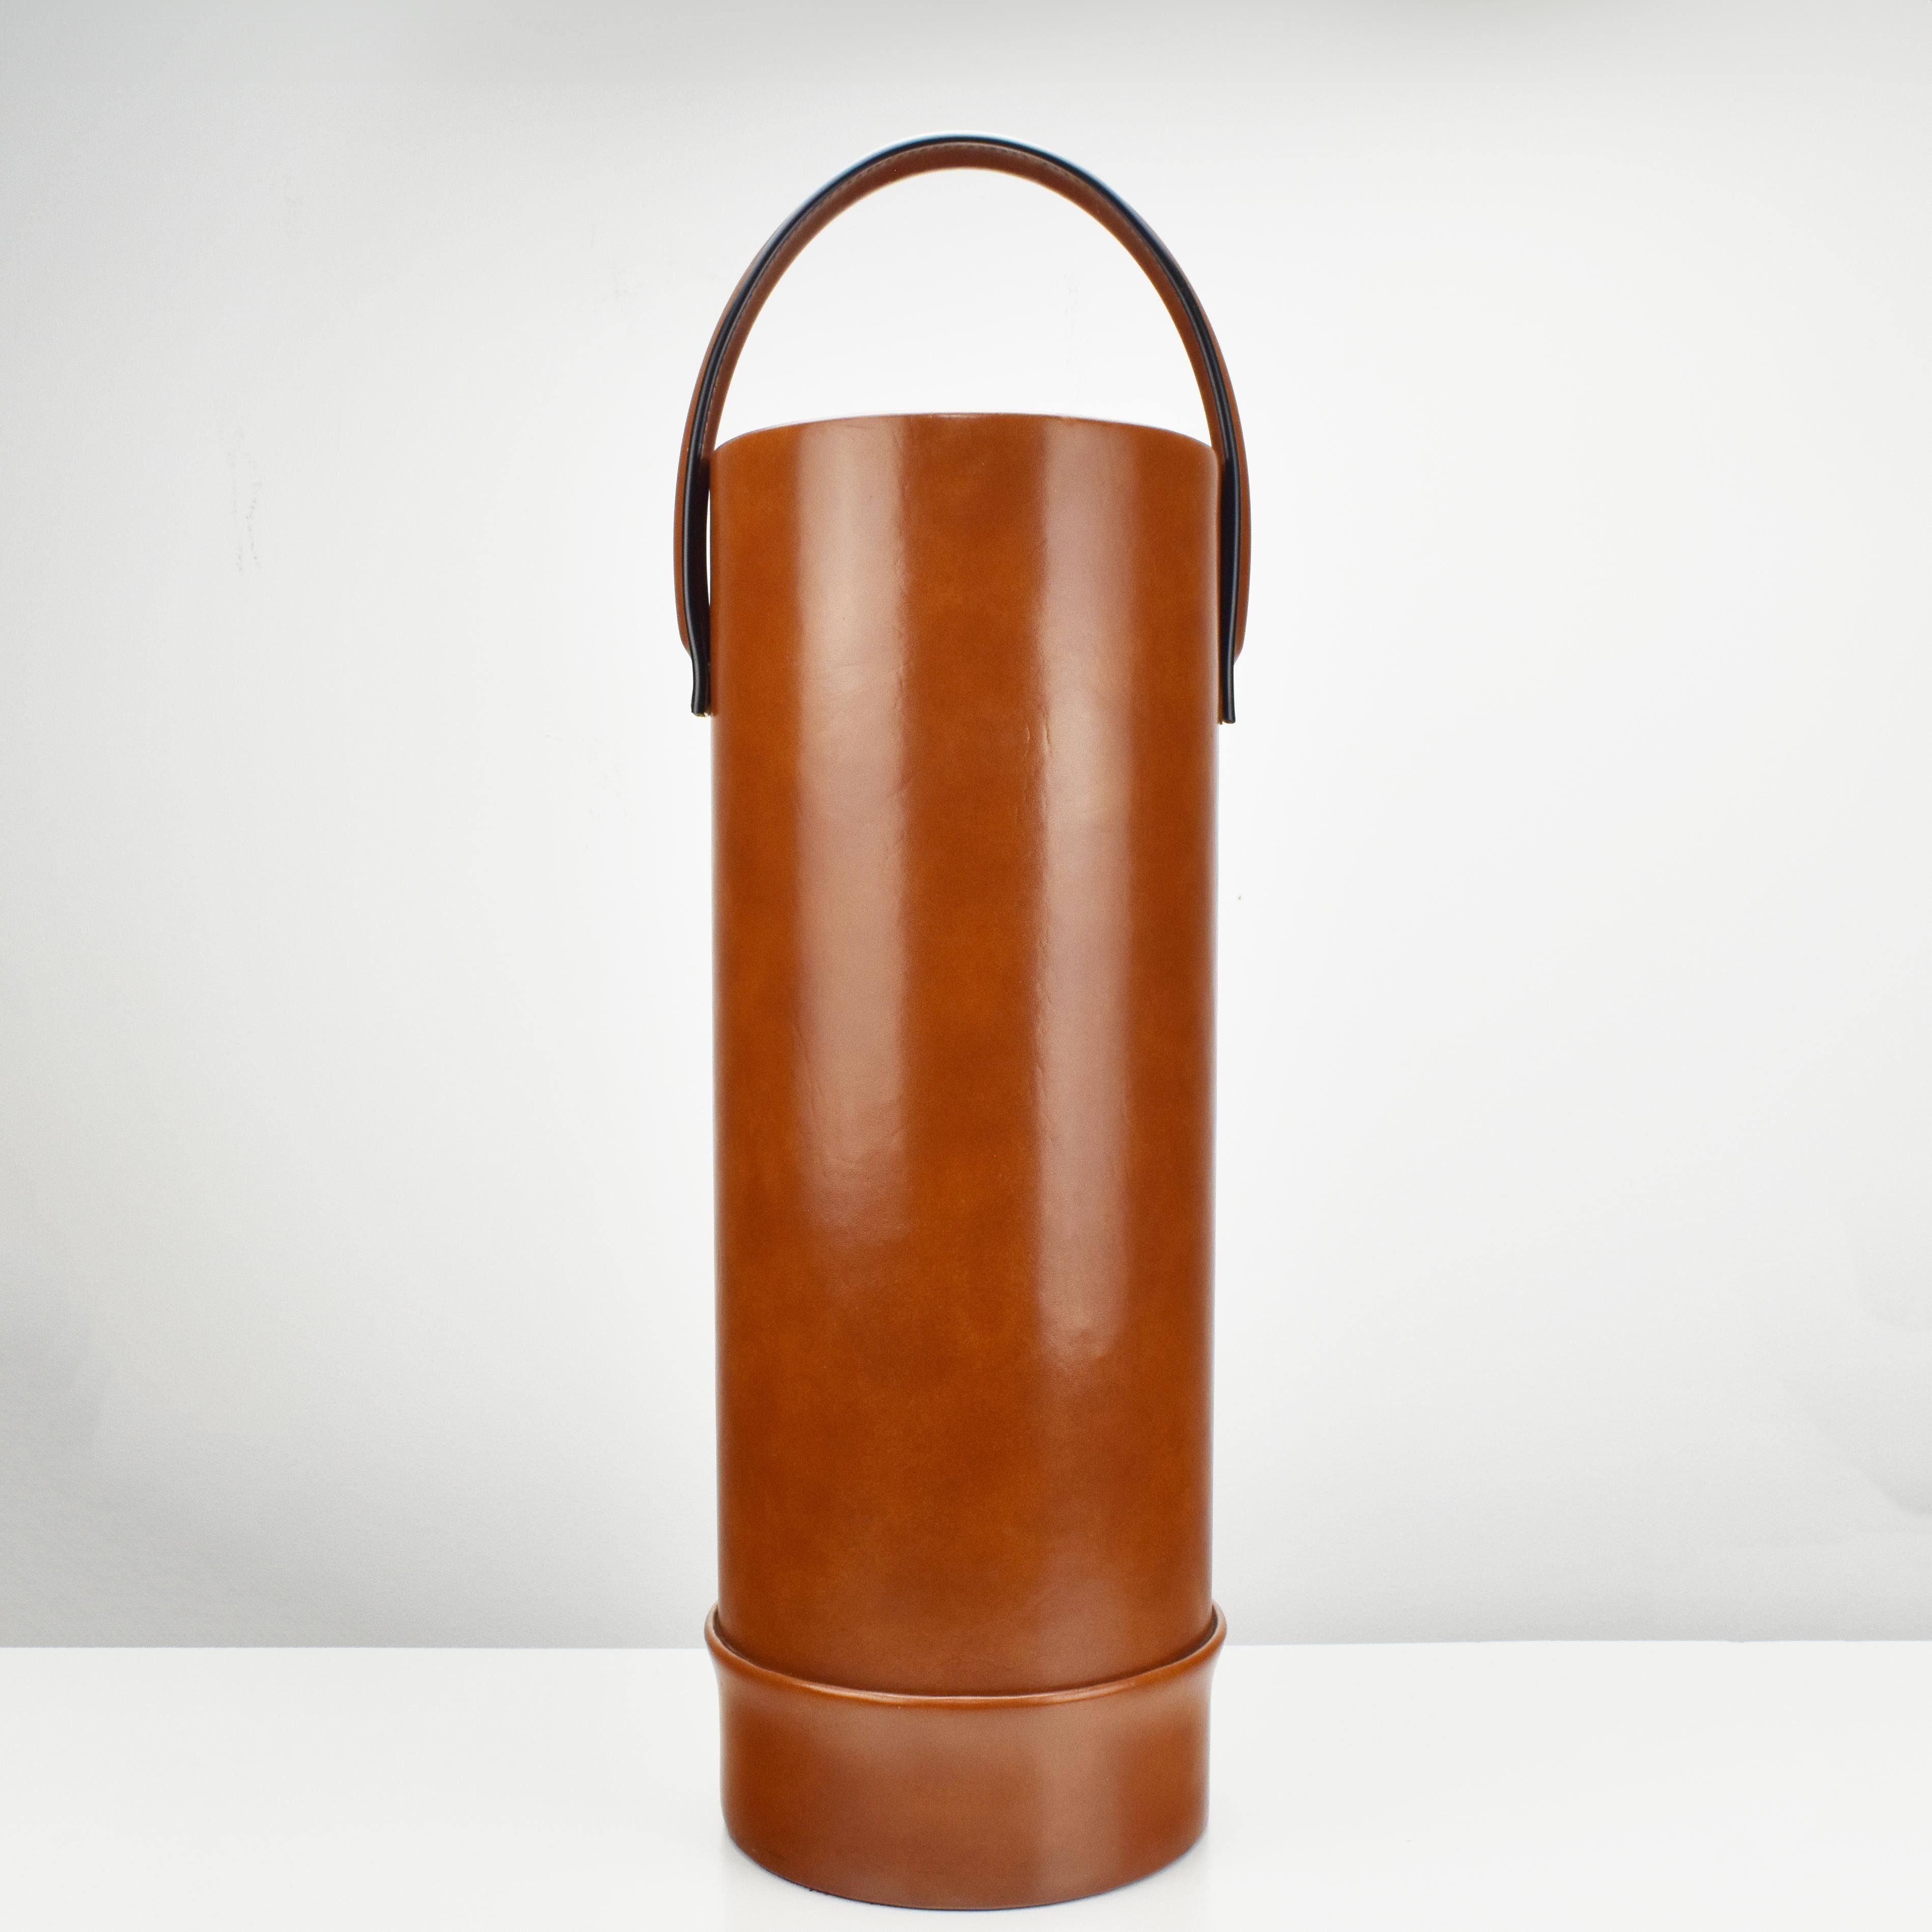 A vintage Jacques Adnet style umbrella stand or waste basket with a movable handle, made of cognac colored faux leather with cream colored contrast stitching by unknown manufacturer, dating to the 1960s.